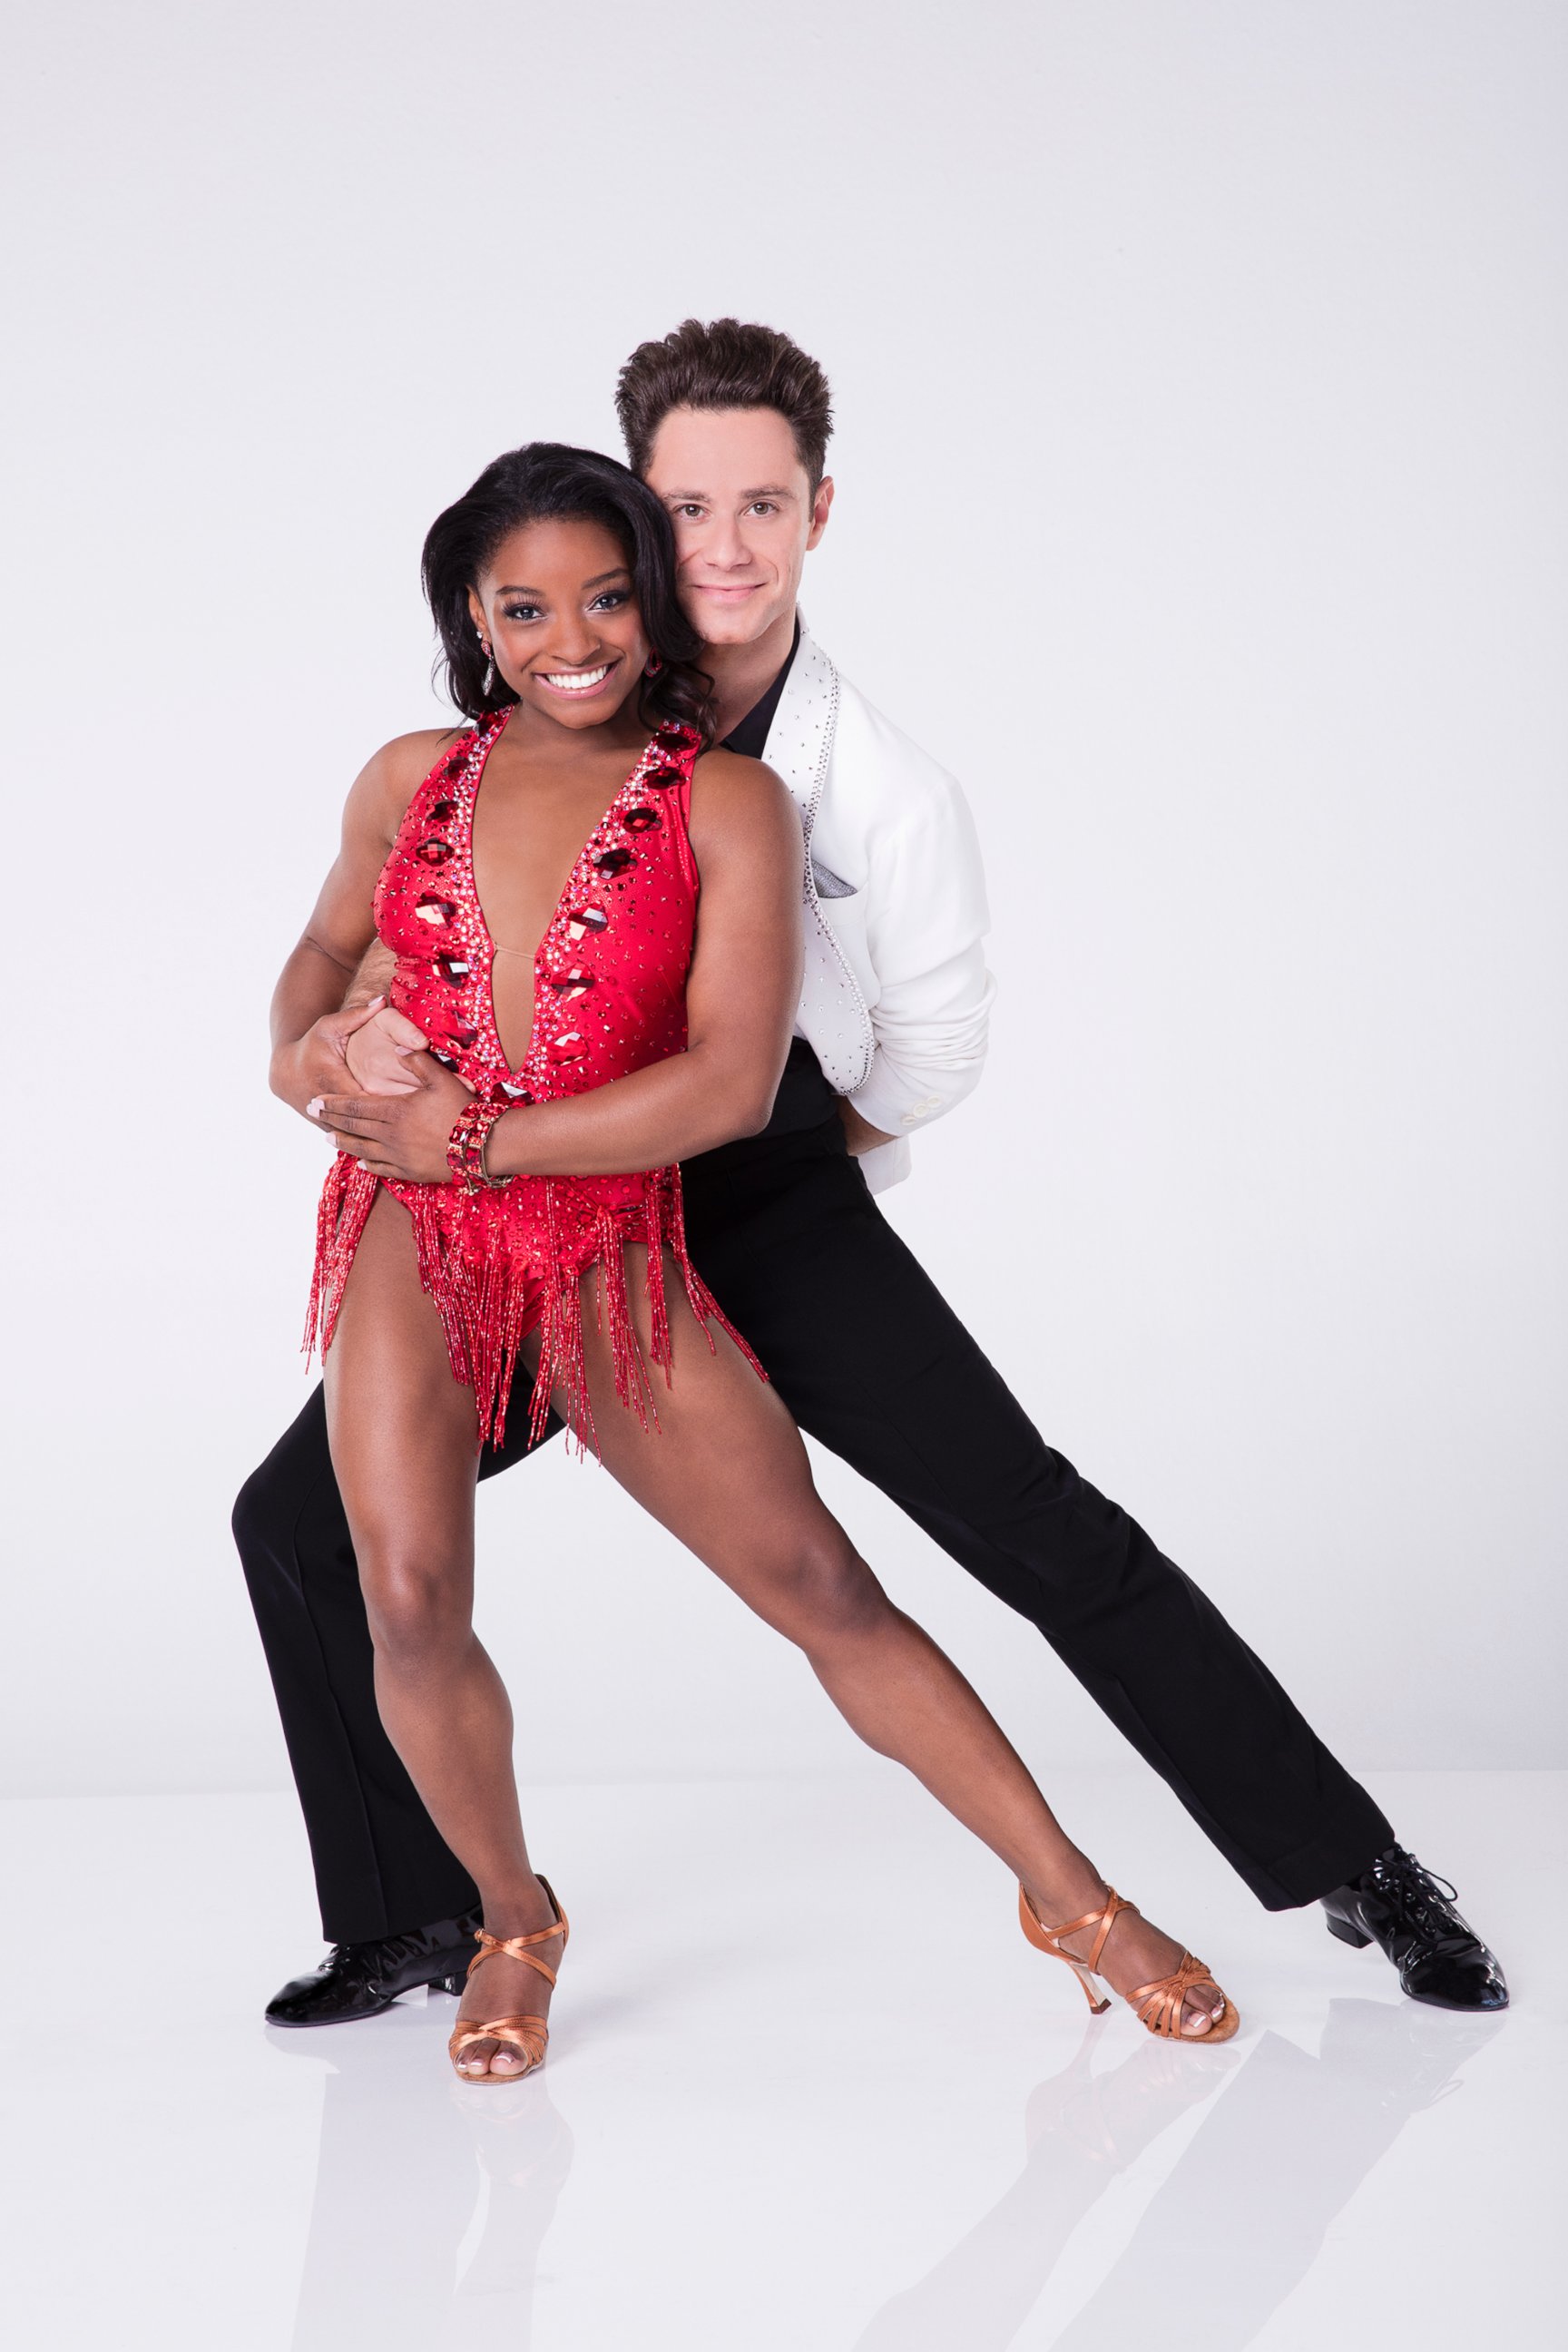 PHOTO: Simone Biles will compete with pro Sasha Farber on the new season of "Dancing With the Stars."